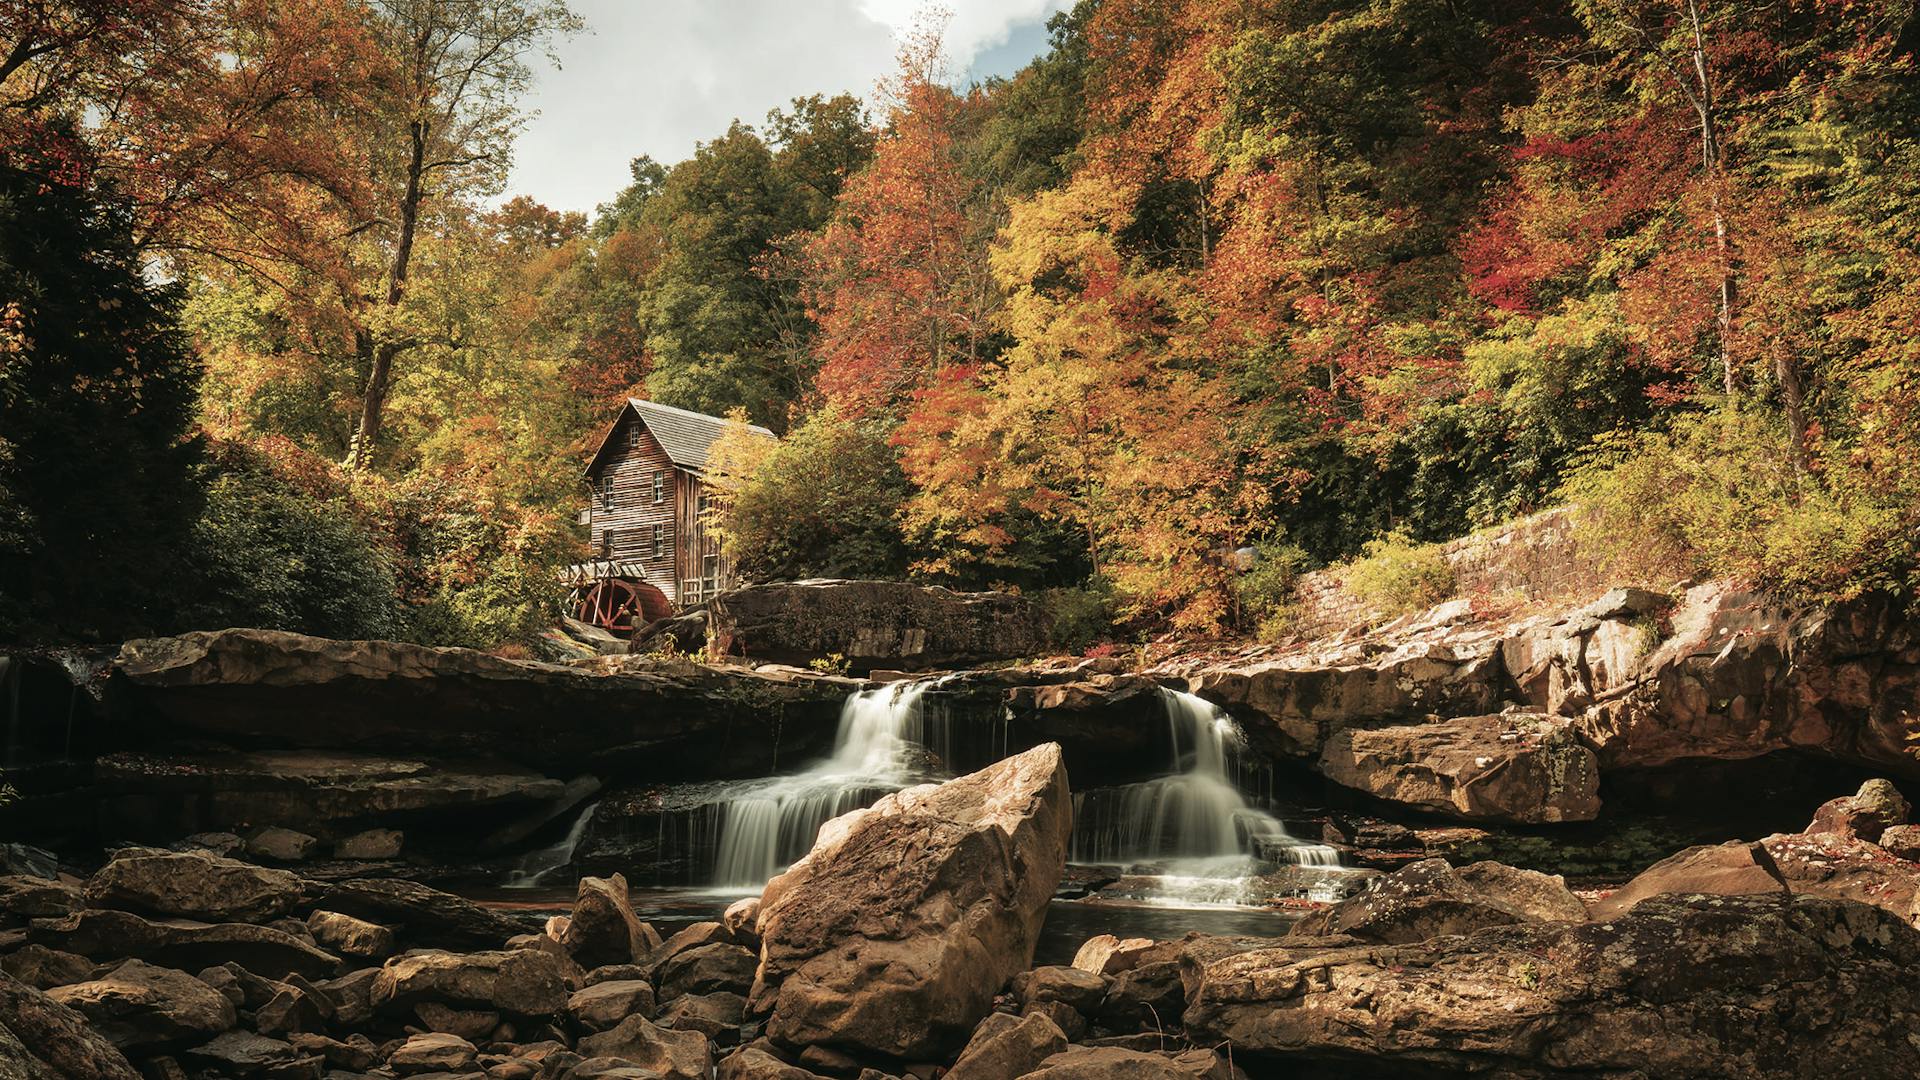 Autumn scene at Babaock State Park (photo by Regis Mahoy)